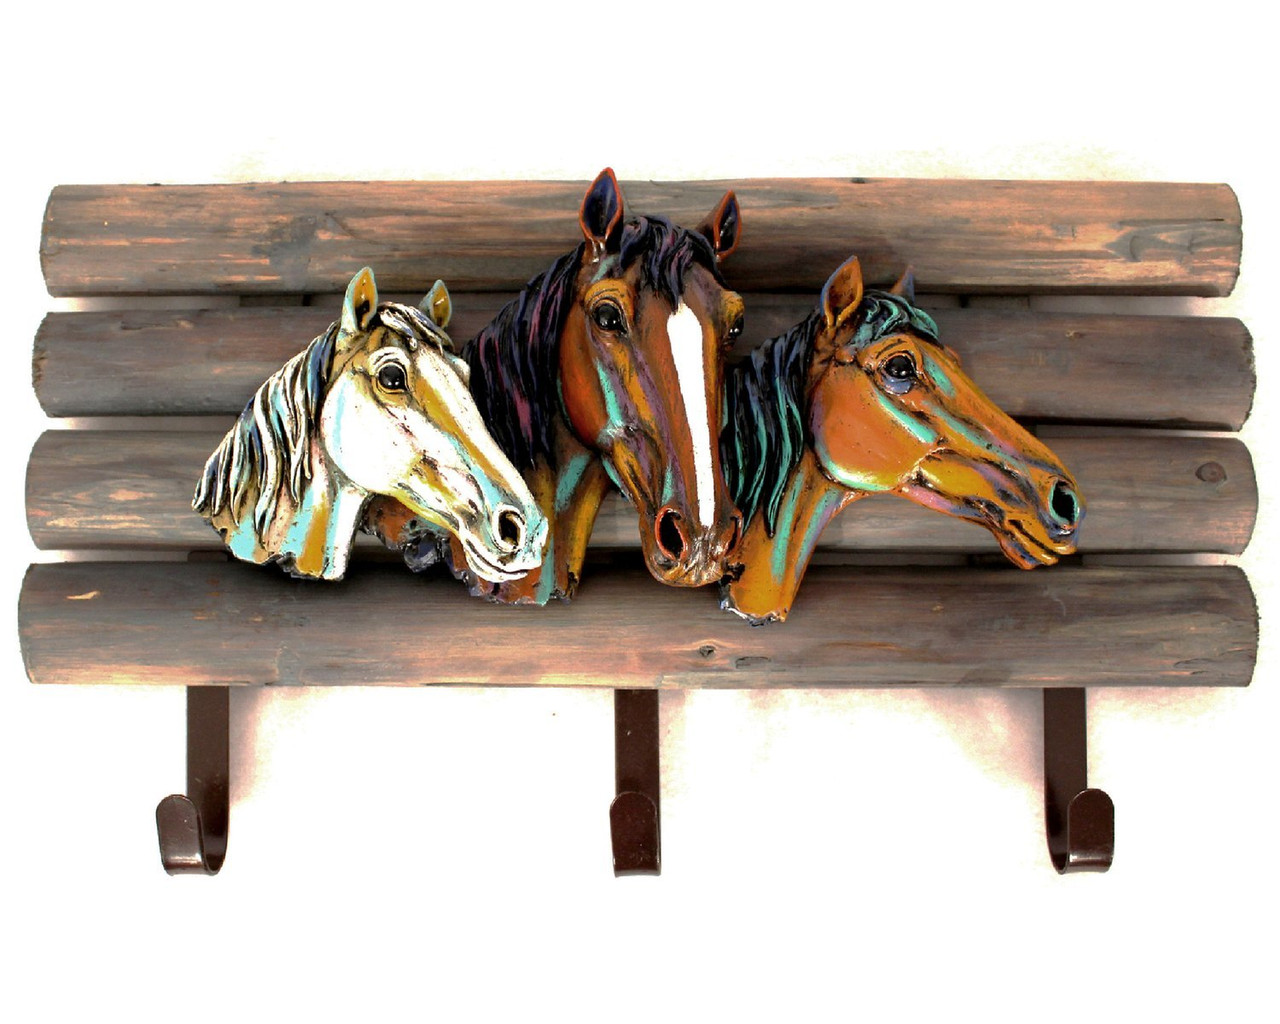  Horses 3 Hooks Coat Wall rack Hanging Unit  Old West Style   17 inches wide